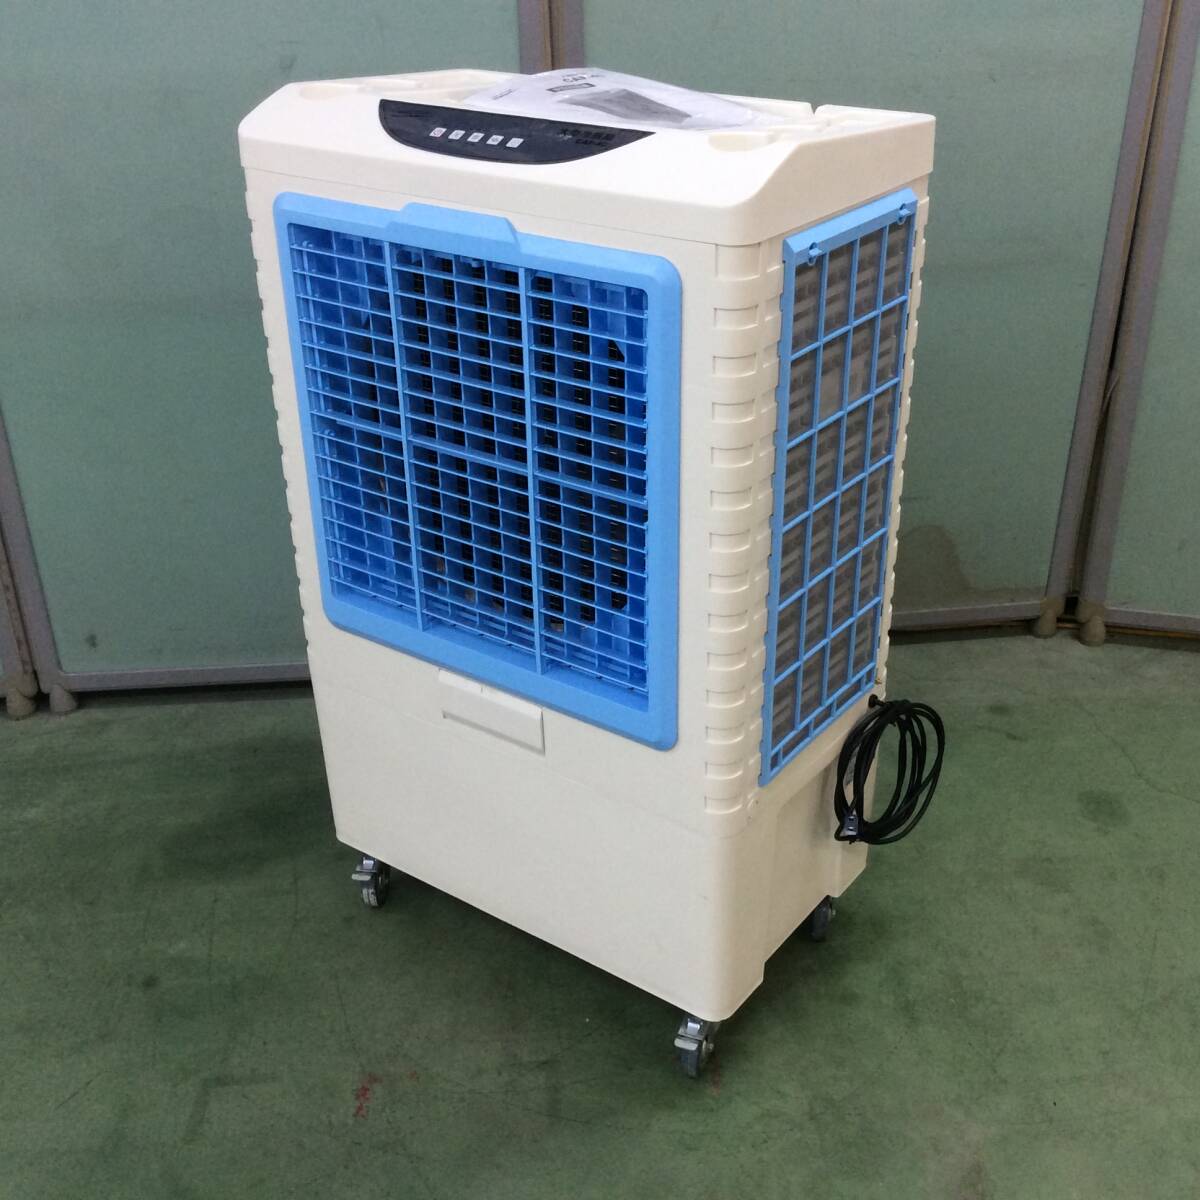 [H-2267] secondhand goods NAKATOMInakatomi large cold air fan CAF-40 air flow 3 -step switch swing * timer function 100V 50/60Hz[ pickup limitation * Shizuoka prefecture Hamamatsu city ]